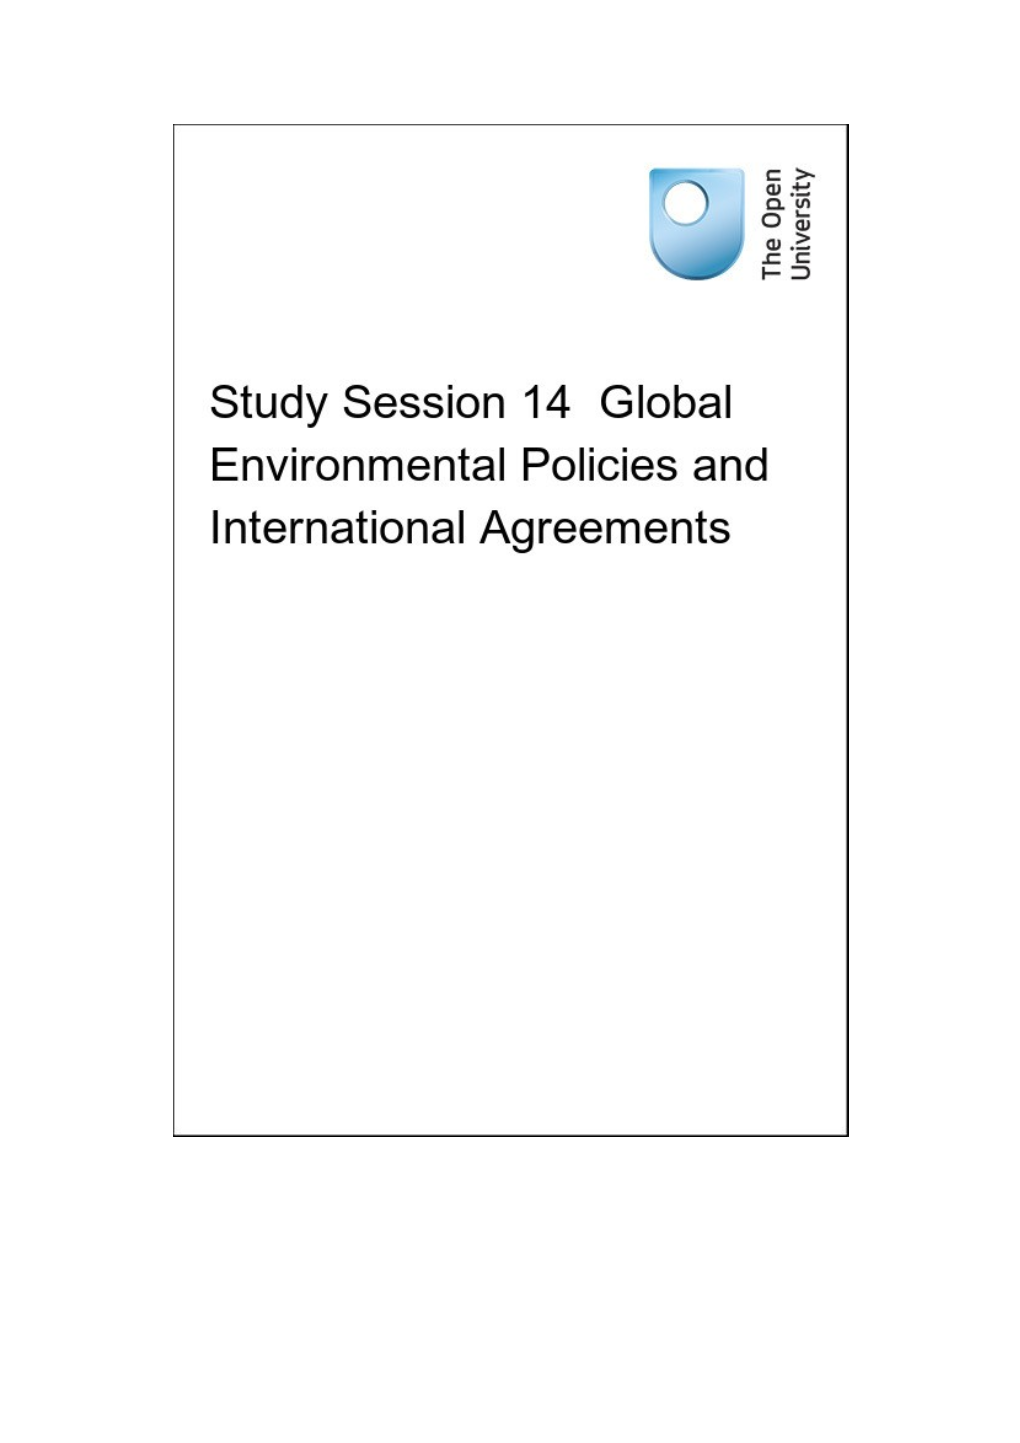 Study Session 14 Global Environmental Policies and International Agreements